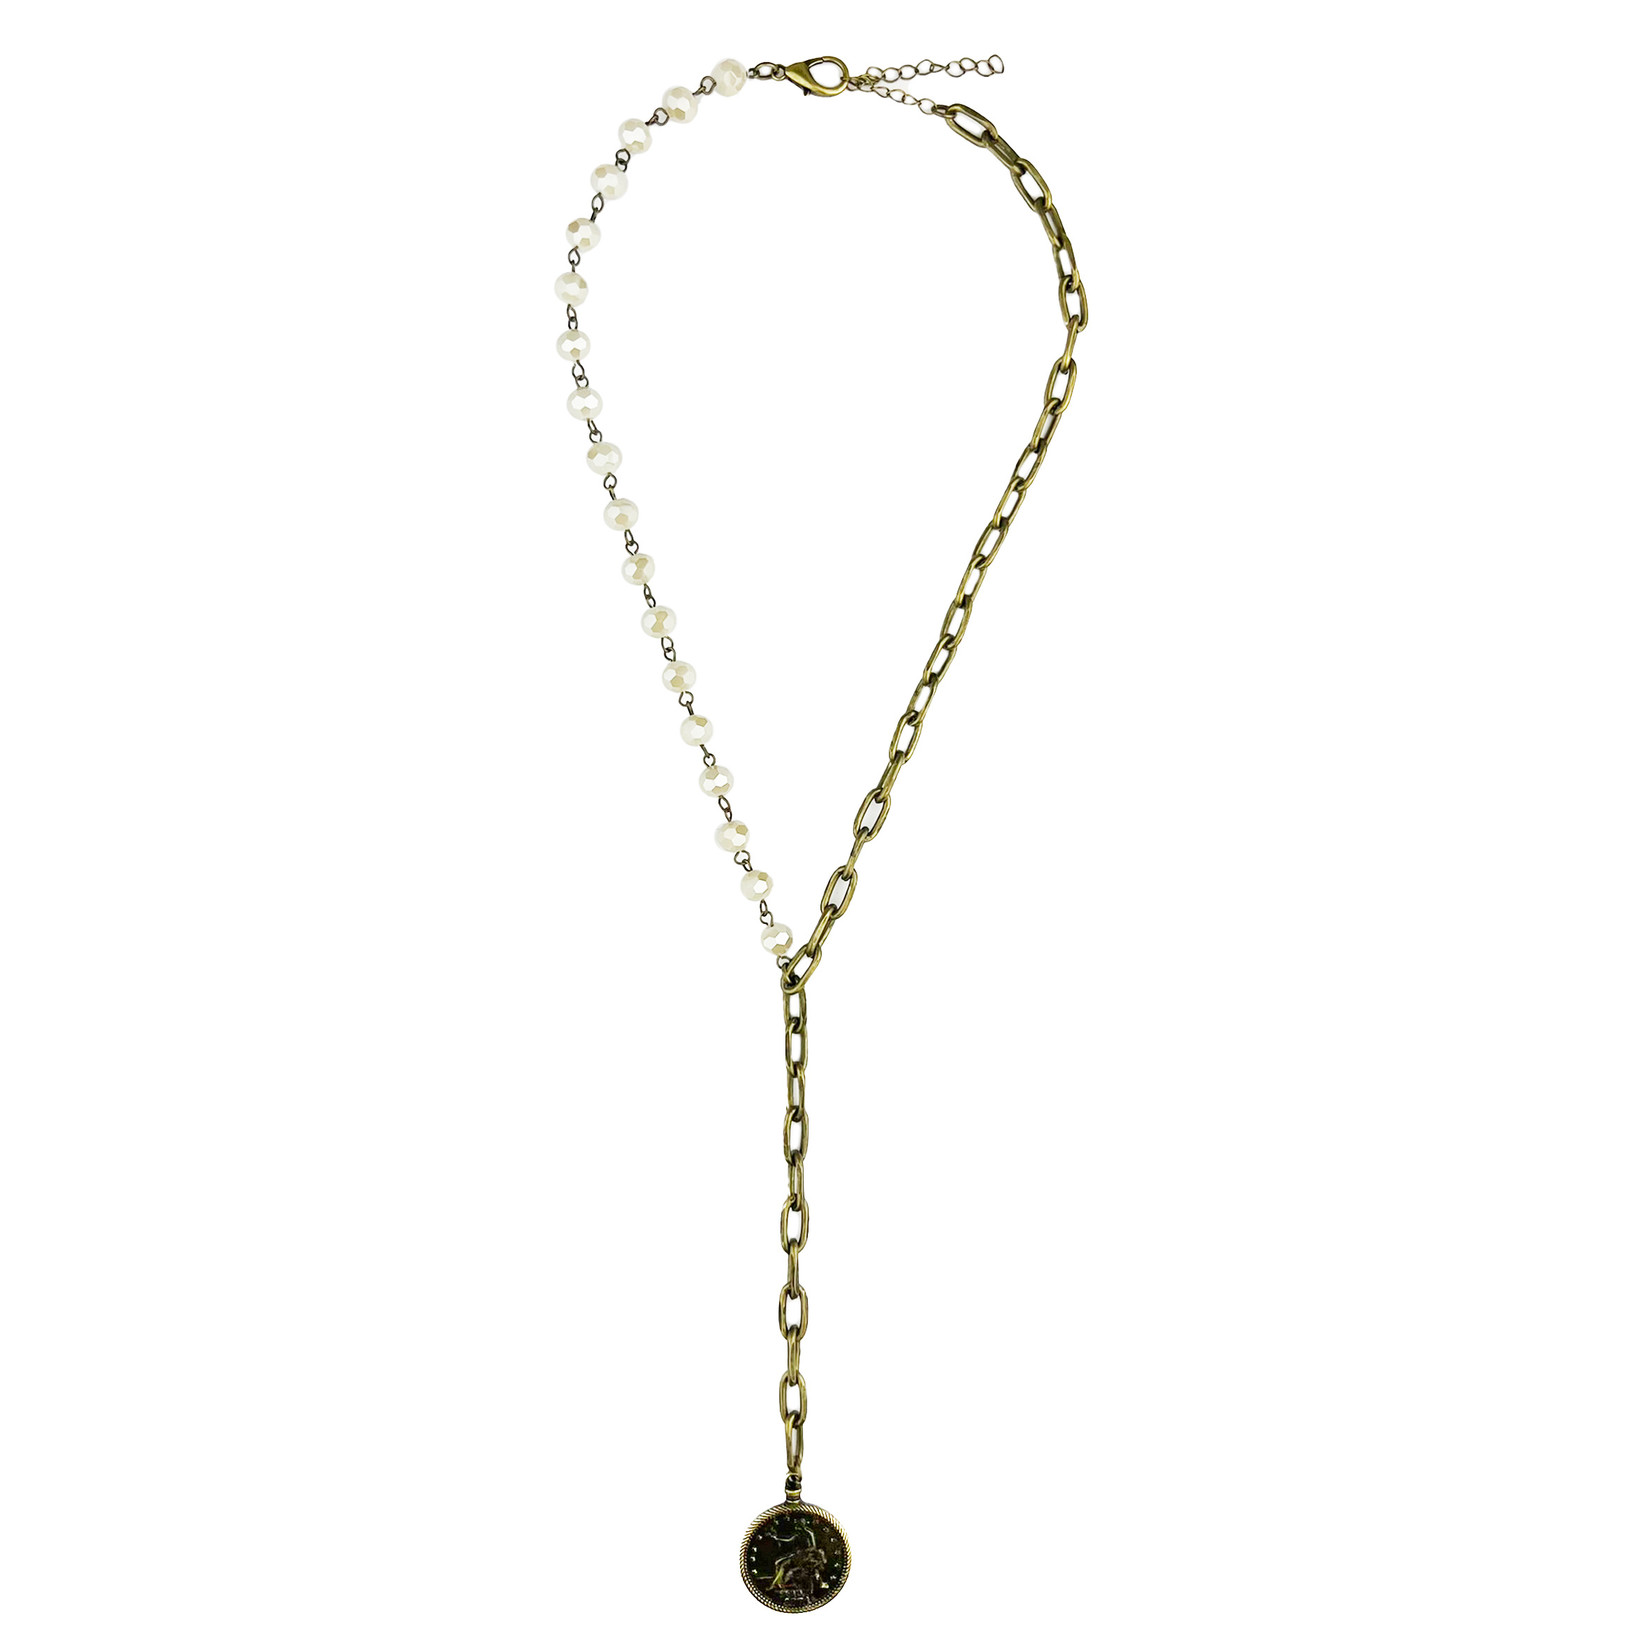 Chain & Beads Necklace with Coin Pendant